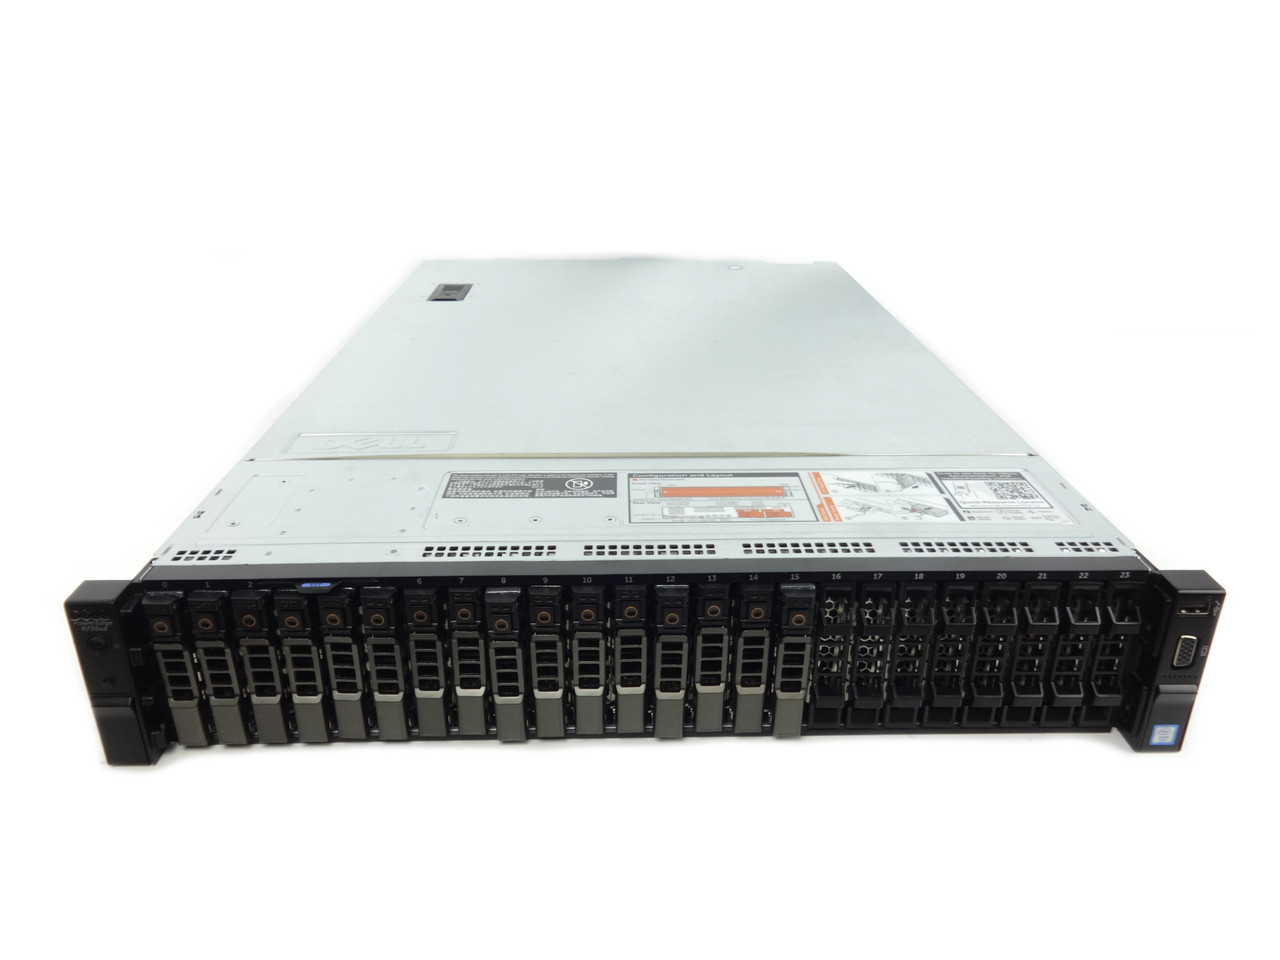 Dell Poweredge R730XD 24x 2.5" Server Build to Order